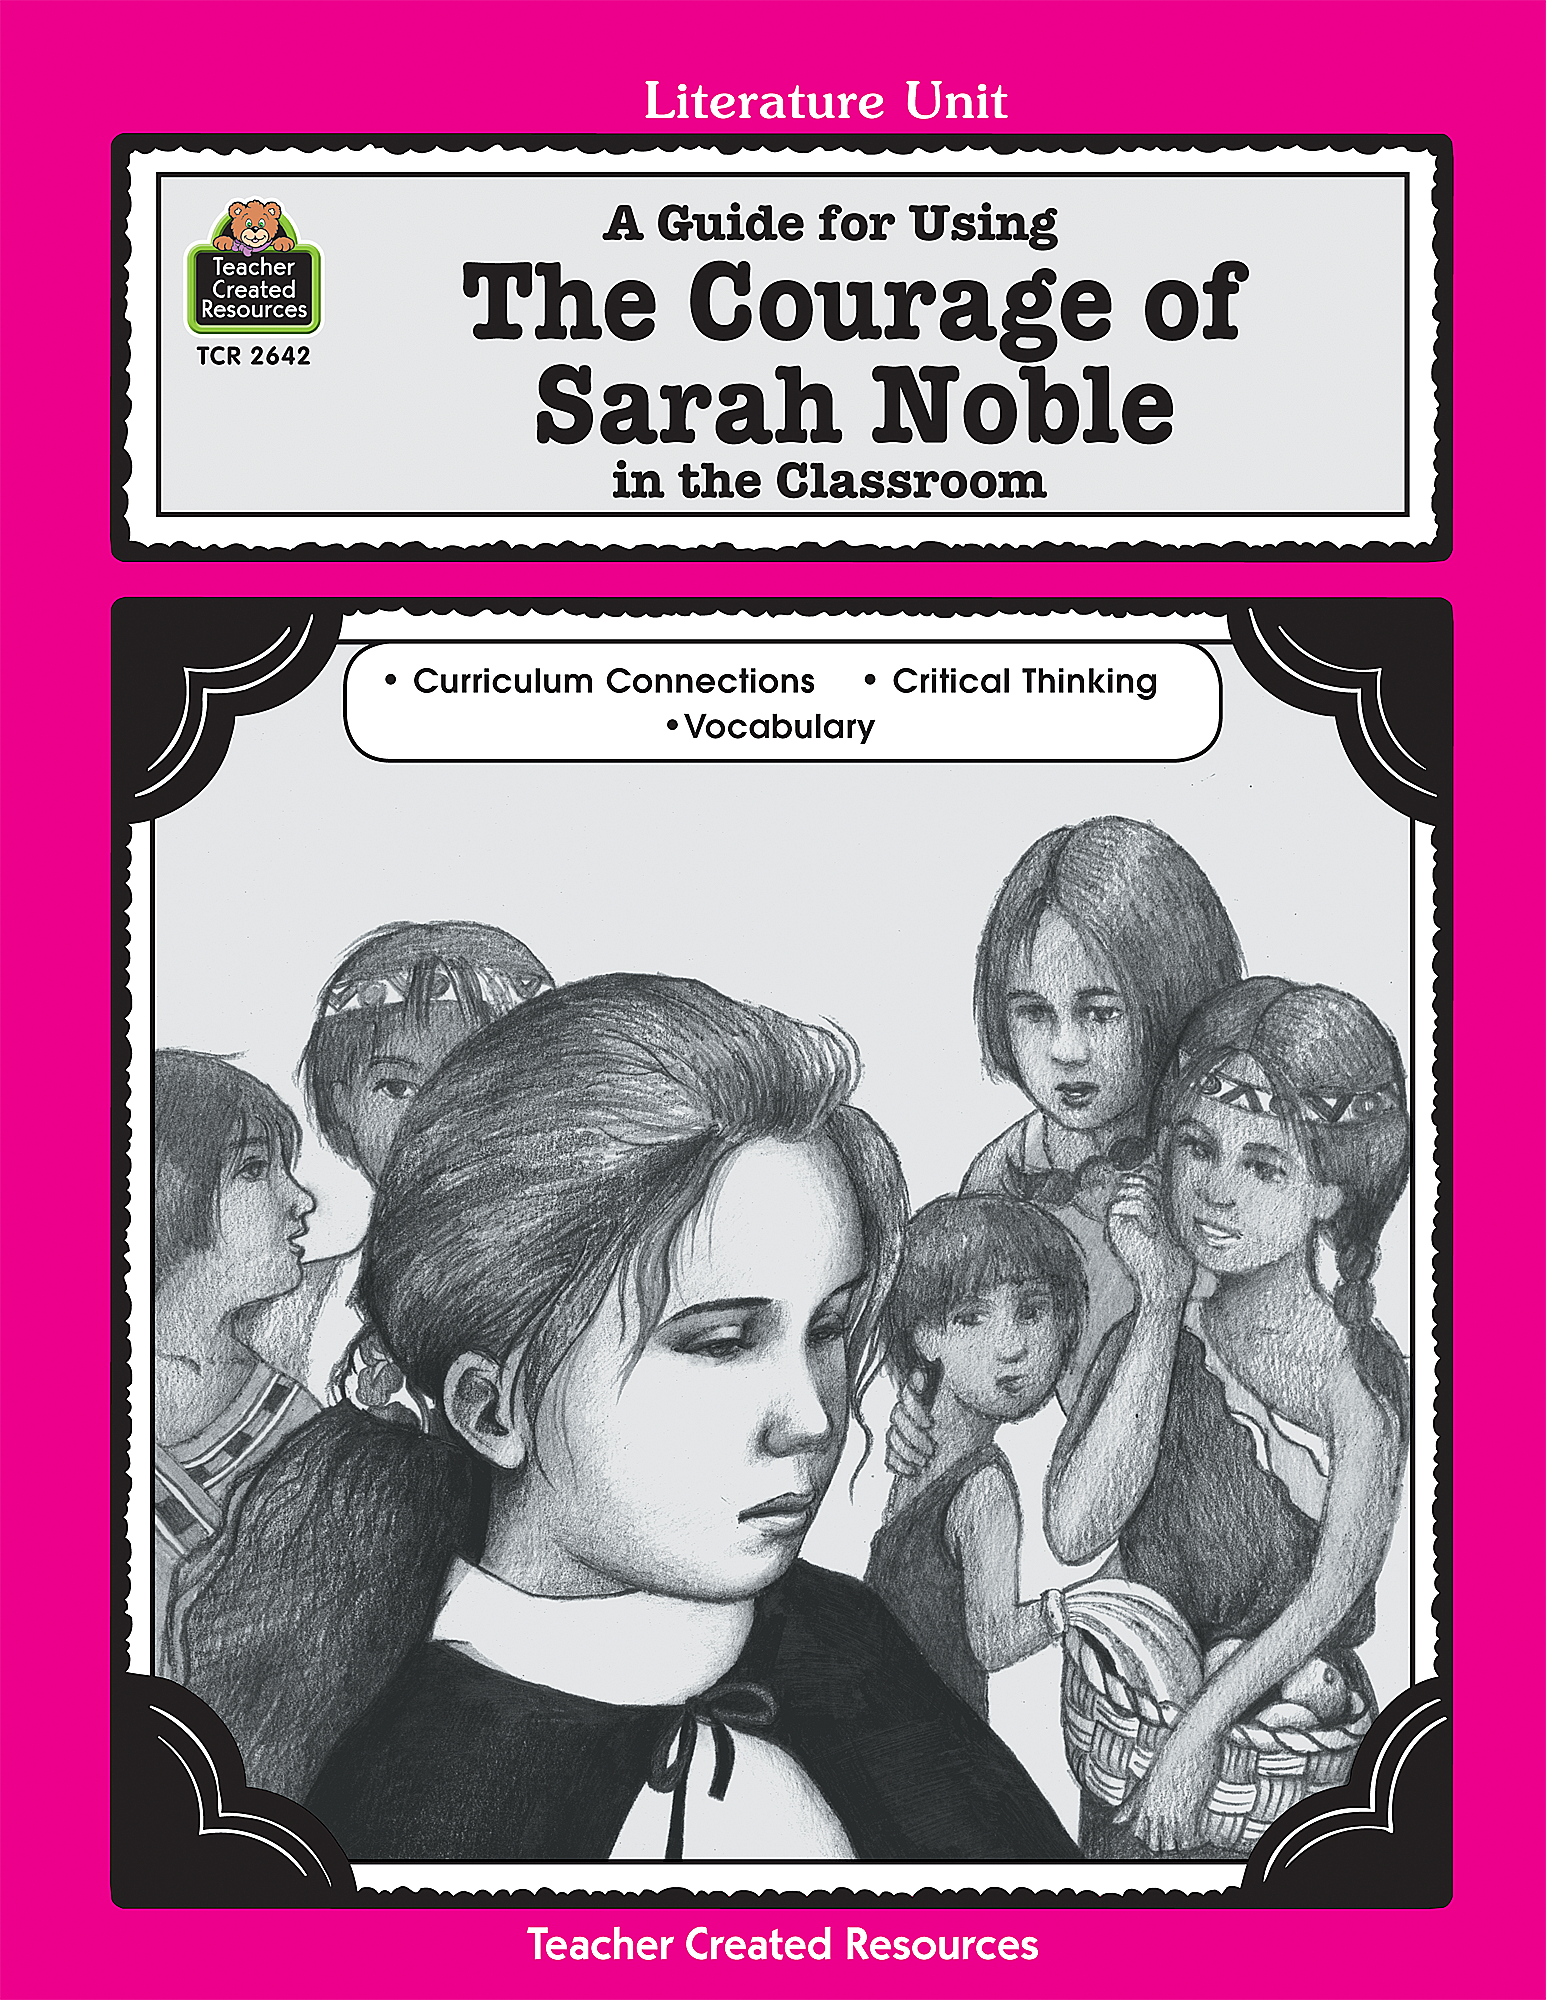 Lit. Unit: The Courage of Sarah Noble